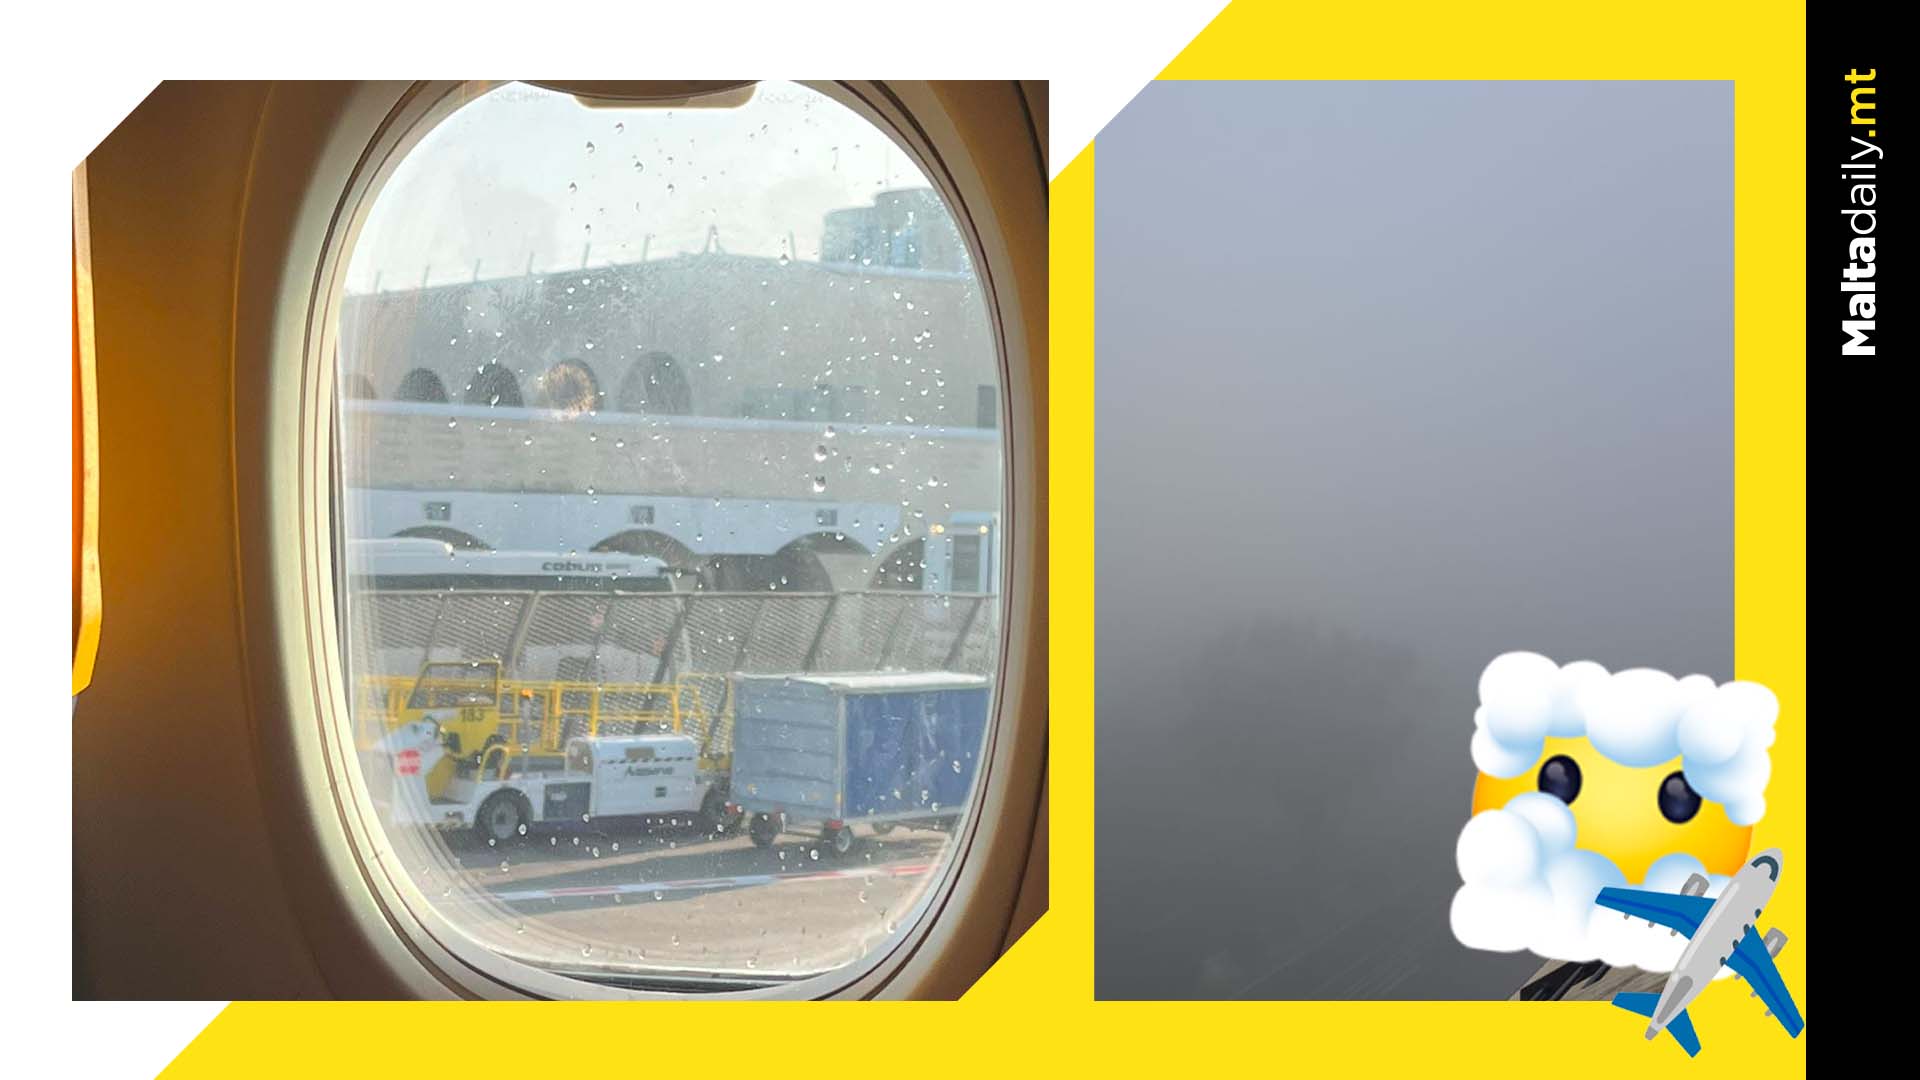 At least 9 flights delayed due to intense fog all over Malta